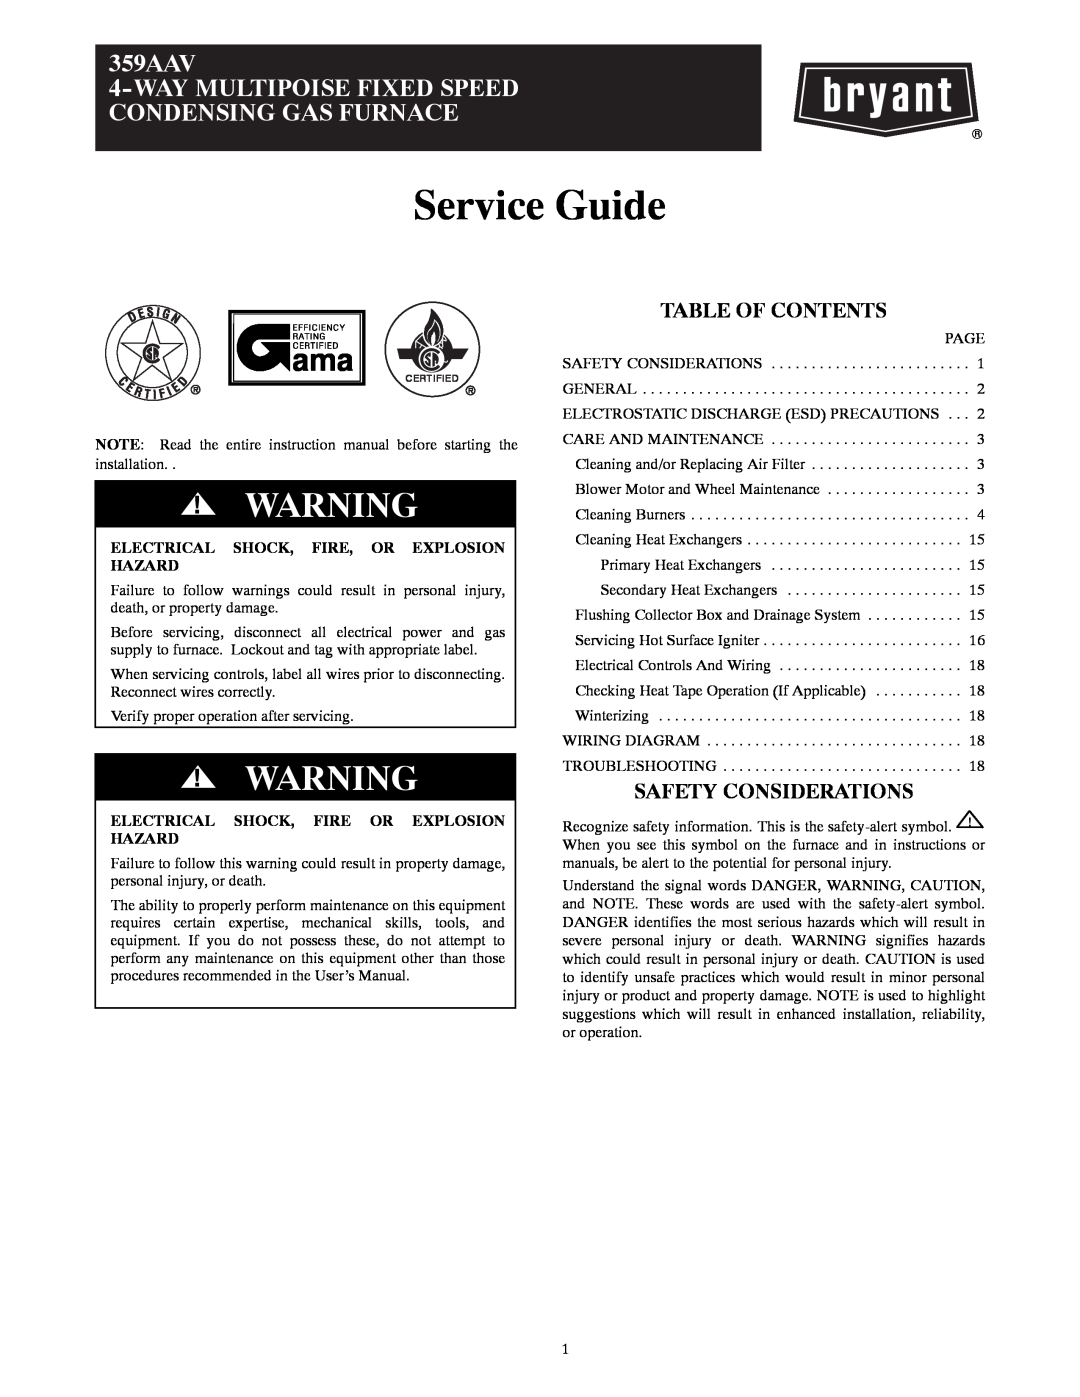 Bryant 359AAV instruction manual Table Of Contents, Safety Considerations, Electrical Shock, Fire, Or Explosion Hazard 